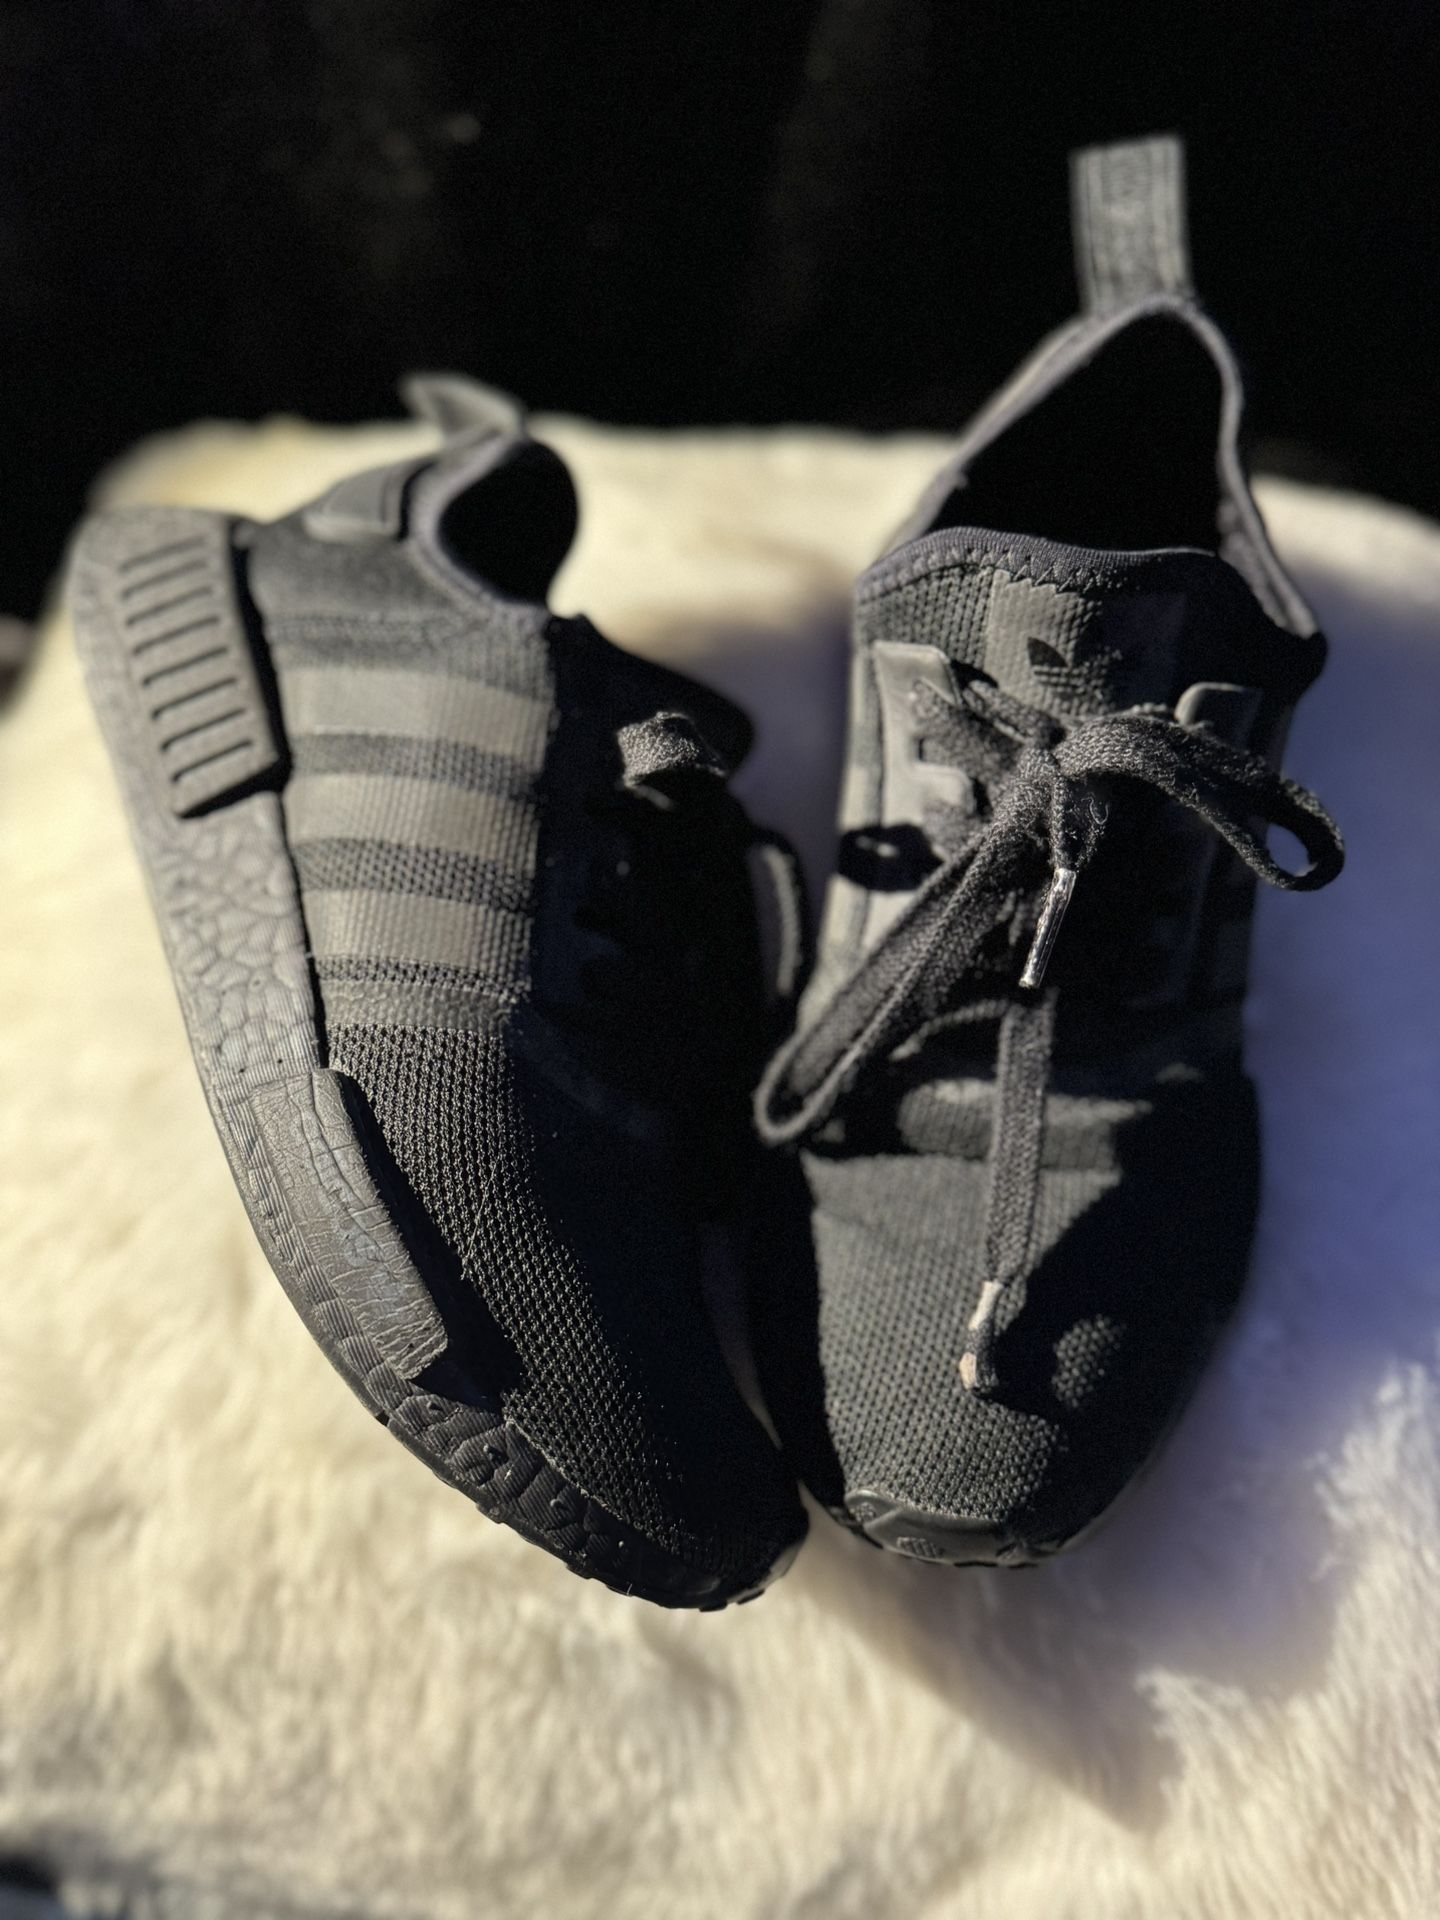 USED BLACK NMD Size 7 Women